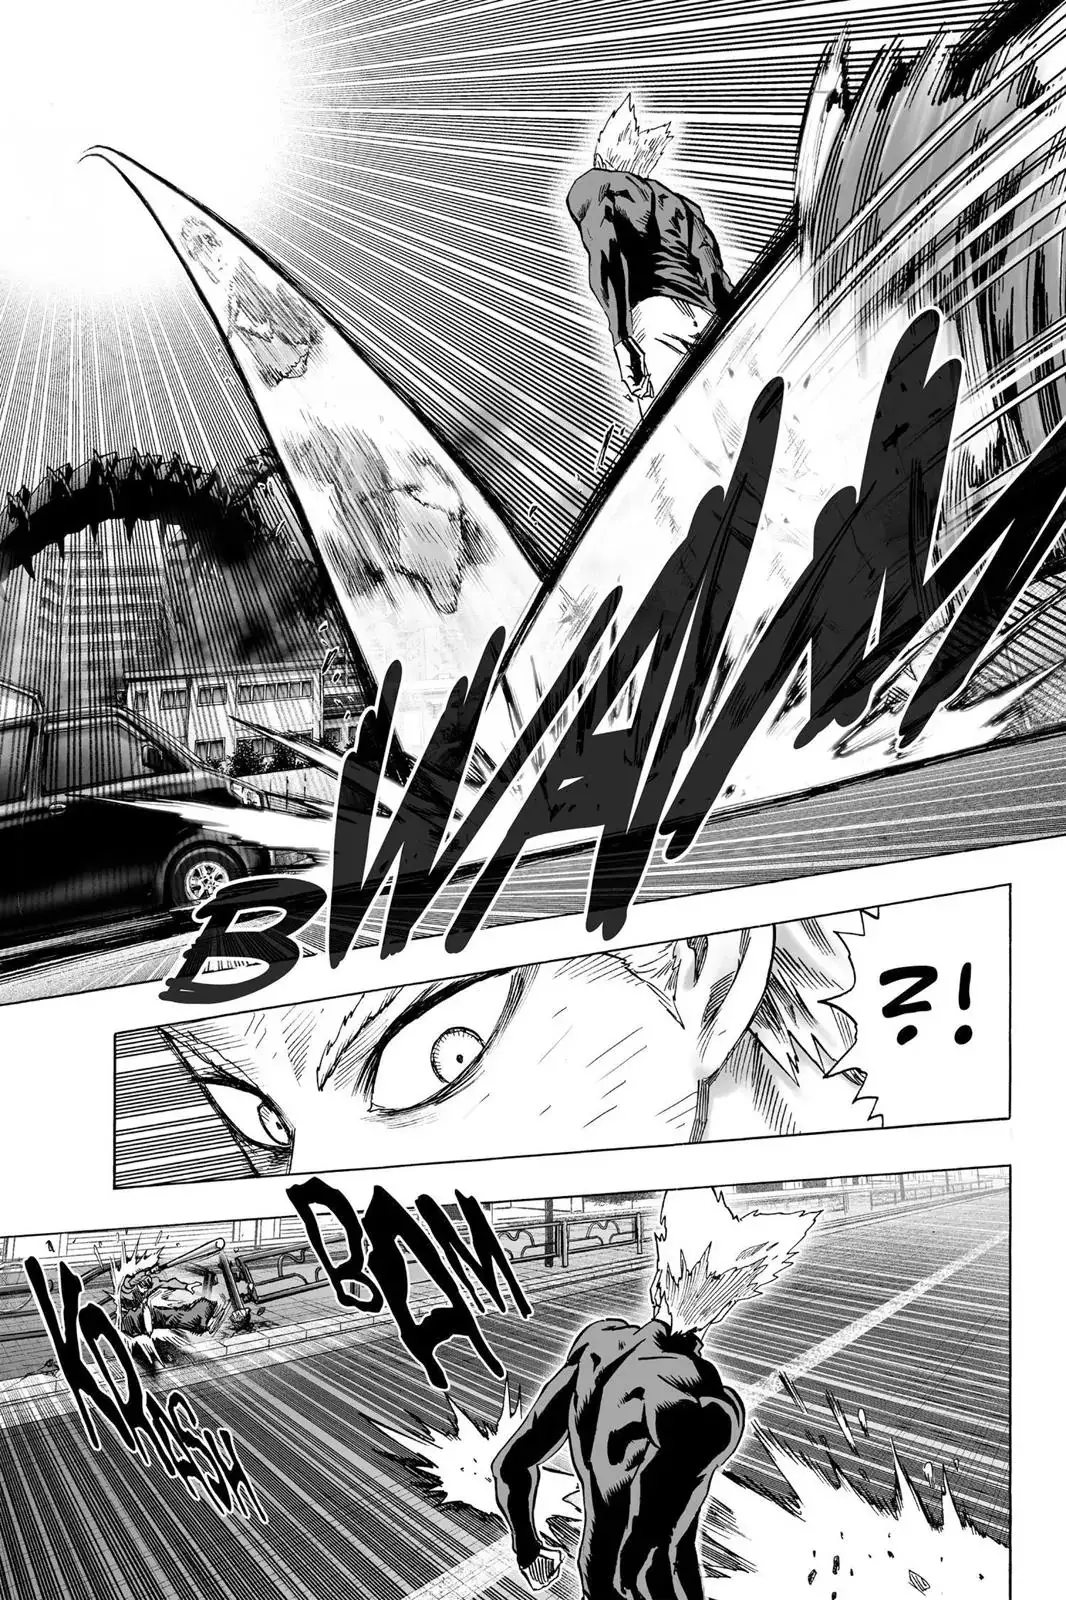 One Punch Man Chapter 57, READ One Punch Man Chapter 57 ONLINE, lost in the cloud genre,lost in the cloud gif,lost in the cloud girl,lost in the cloud goods,lost in the cloud goodreads,lost in the cloud,lost ark cloud gaming,lost odyssey cloud gaming,lost in the cloud fanart,lost in the cloud fanfic,lost in the cloud fandom,lost in the cloud first kiss,lost in the cloud font,lost in the cloud ending,lost in the cloud episode 97,lost in the cloud edit,lost in the cloud explained,lost in the cloud dog,lost in the cloud discord server,lost in the cloud desktop wallpaper,lost in the cloud drawing,can't find my cloud on network,lost in the cloud characters,lost in the cloud chapter 93 release date,lost in the cloud birthday,lost in the cloud birthday art,lost in the cloud background,lost in the cloud banner,lost in the clouds meaning,what is the black cloud in lost,lost in the cloud ao3,lost in the cloud anime,lost in the cloud art,lost in the cloud author twitter,lost in the cloud author instagram,lost in the cloud artist,lost in the cloud acrylic stand,lost in the cloud artist twitter,lost in the cloud art style,lost in the cloud analysis